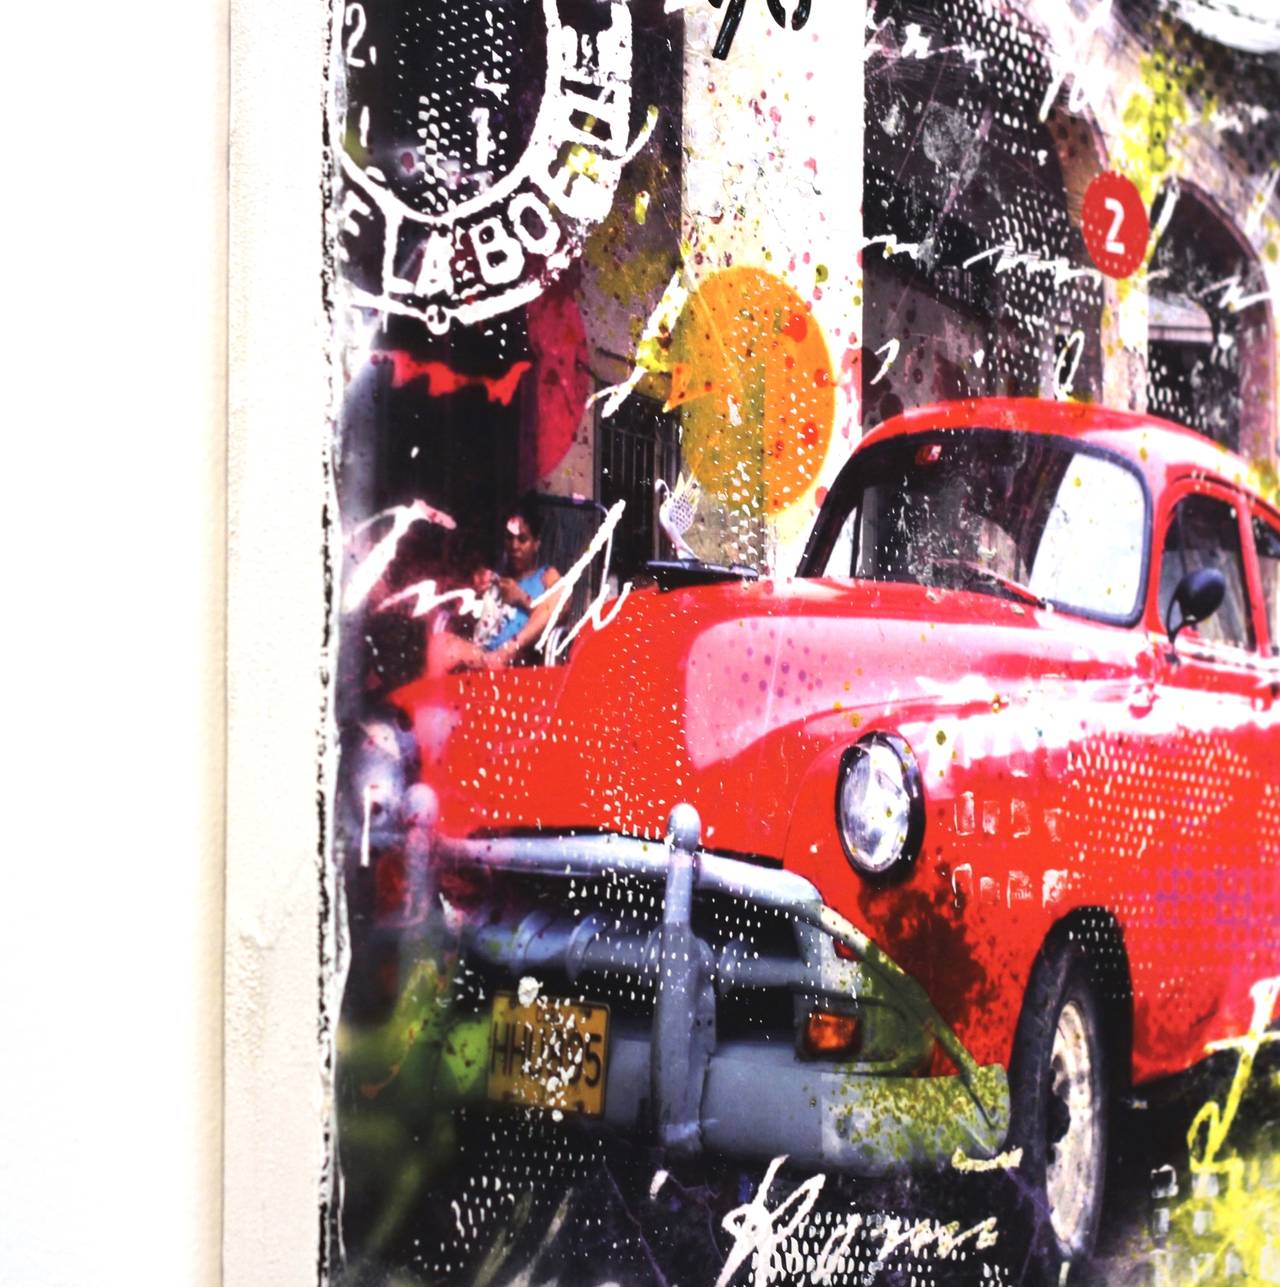 96 Curves - Original Retro Vintage American Car Collector Painting on Canvas - Pop Art Mixed Media Art by Marion Duschletta